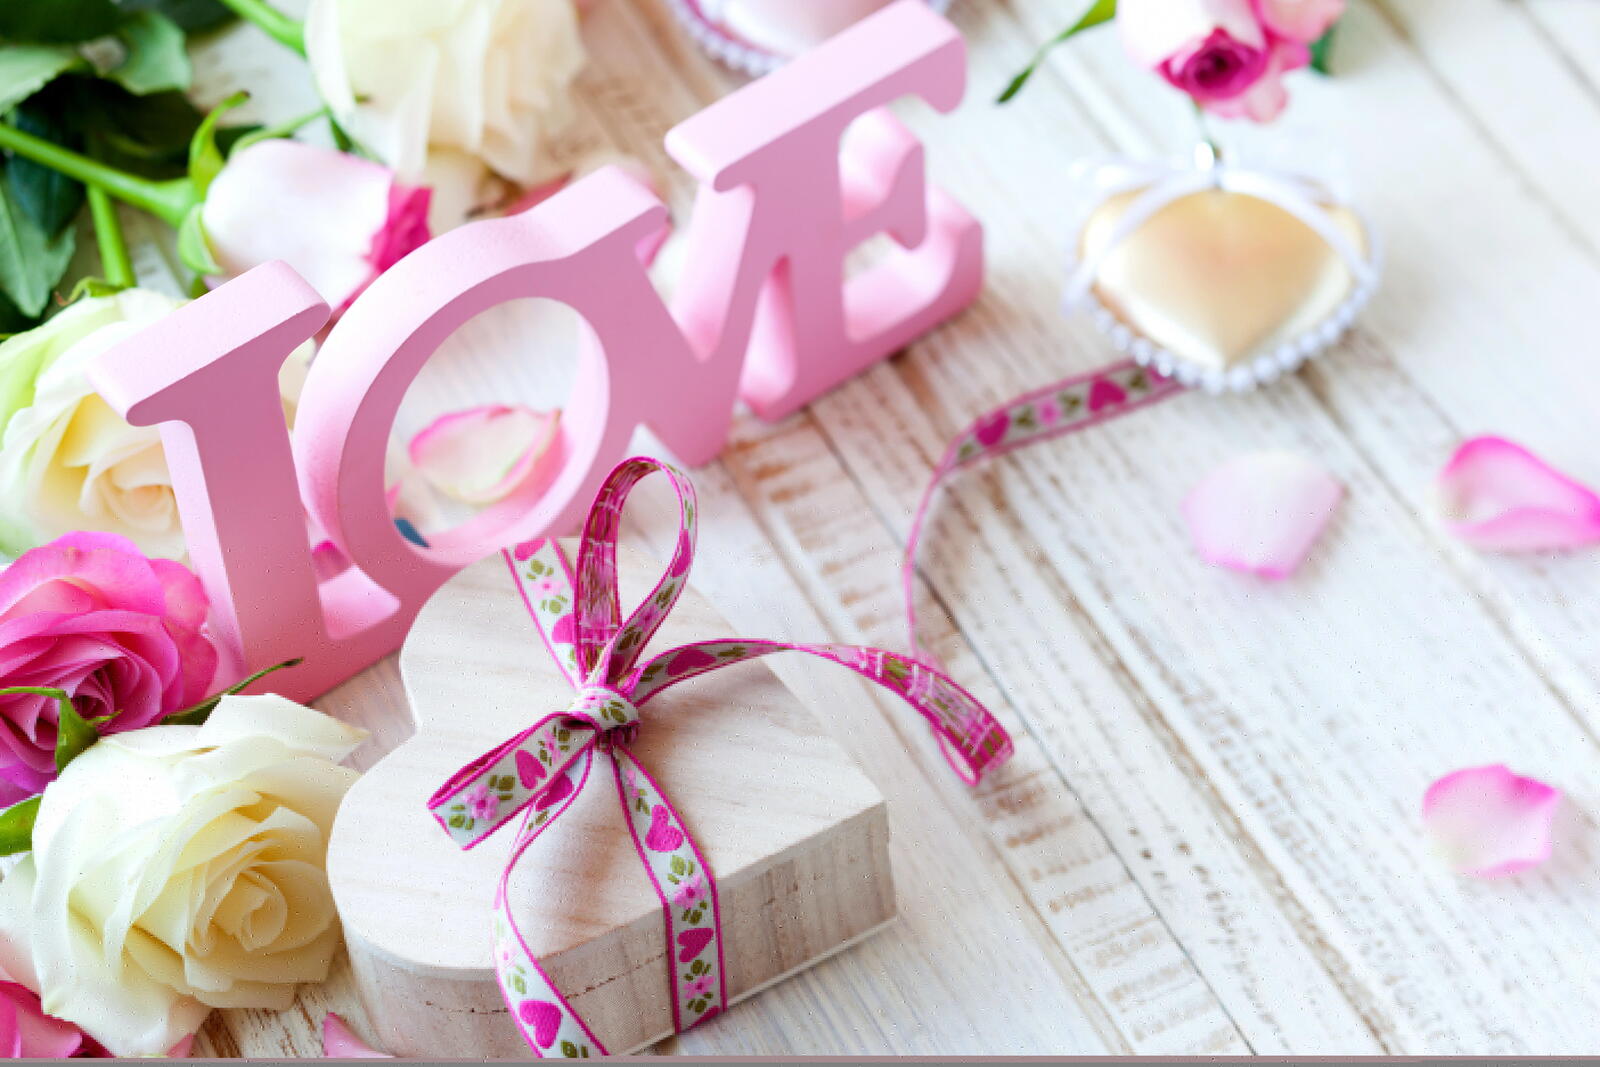 Wallpapers valentine day romantic on the desktop